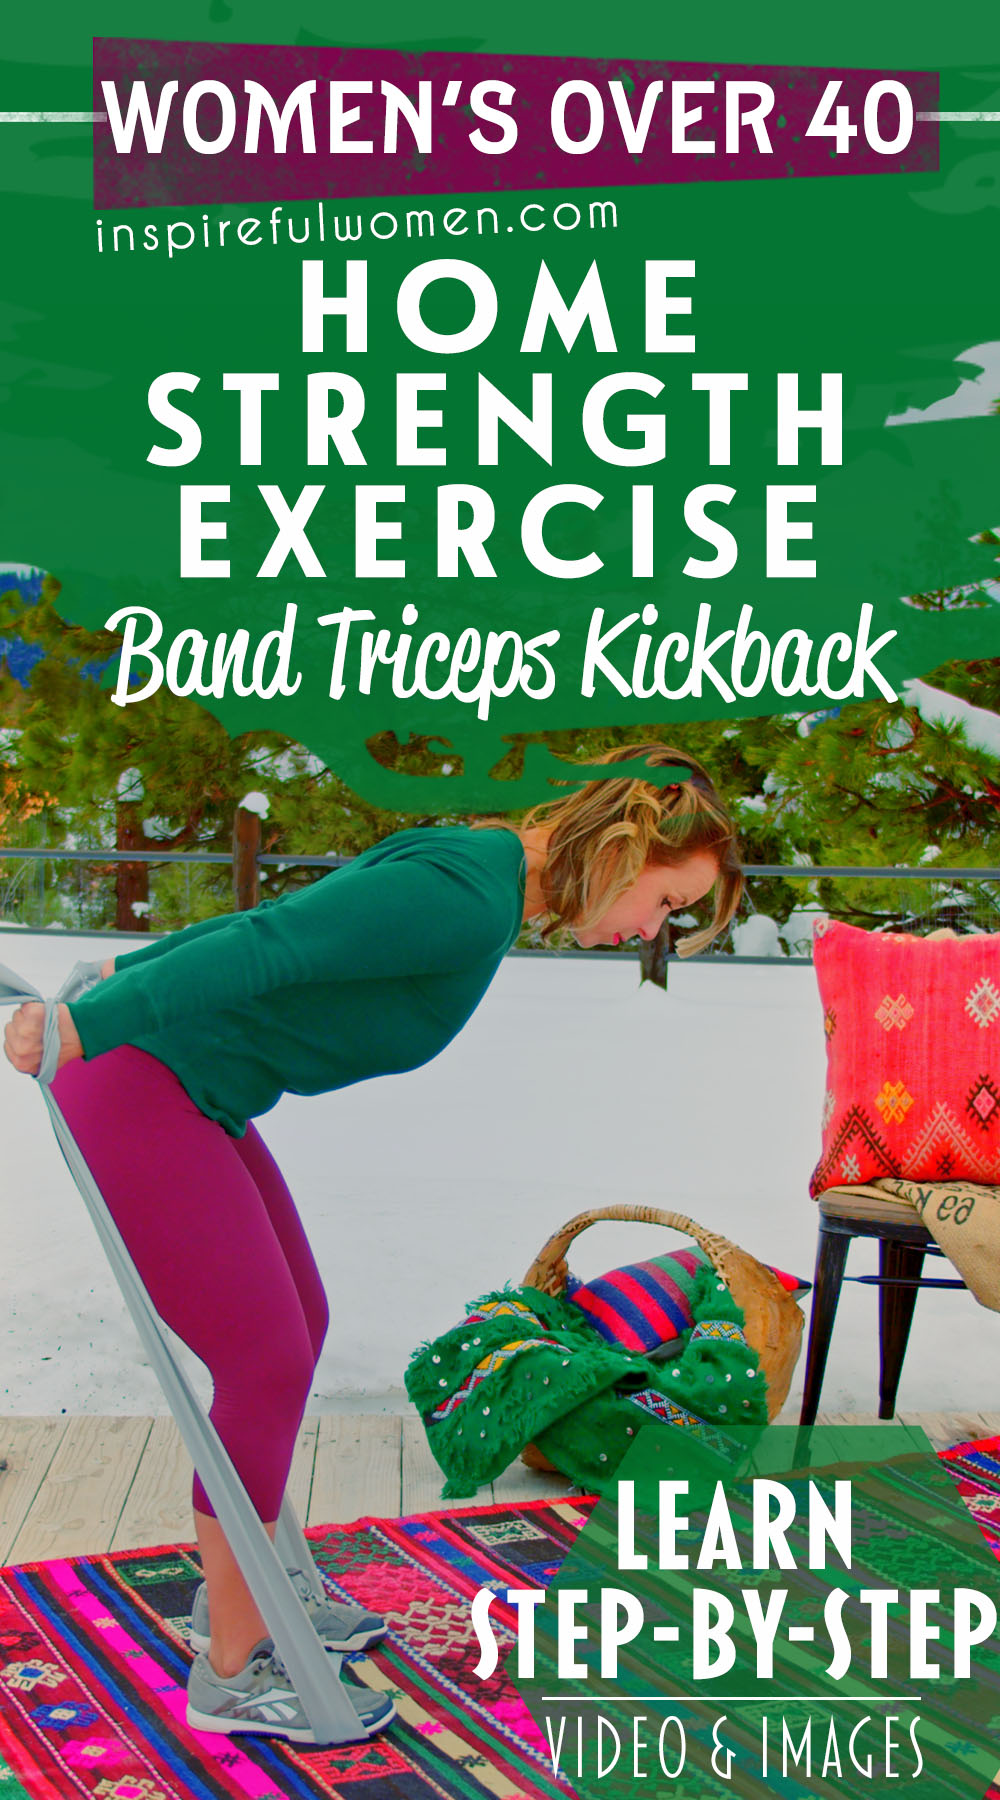 resistance-band-triceps-kickbacks-standing-bent-over-home-exercise-women-over-40